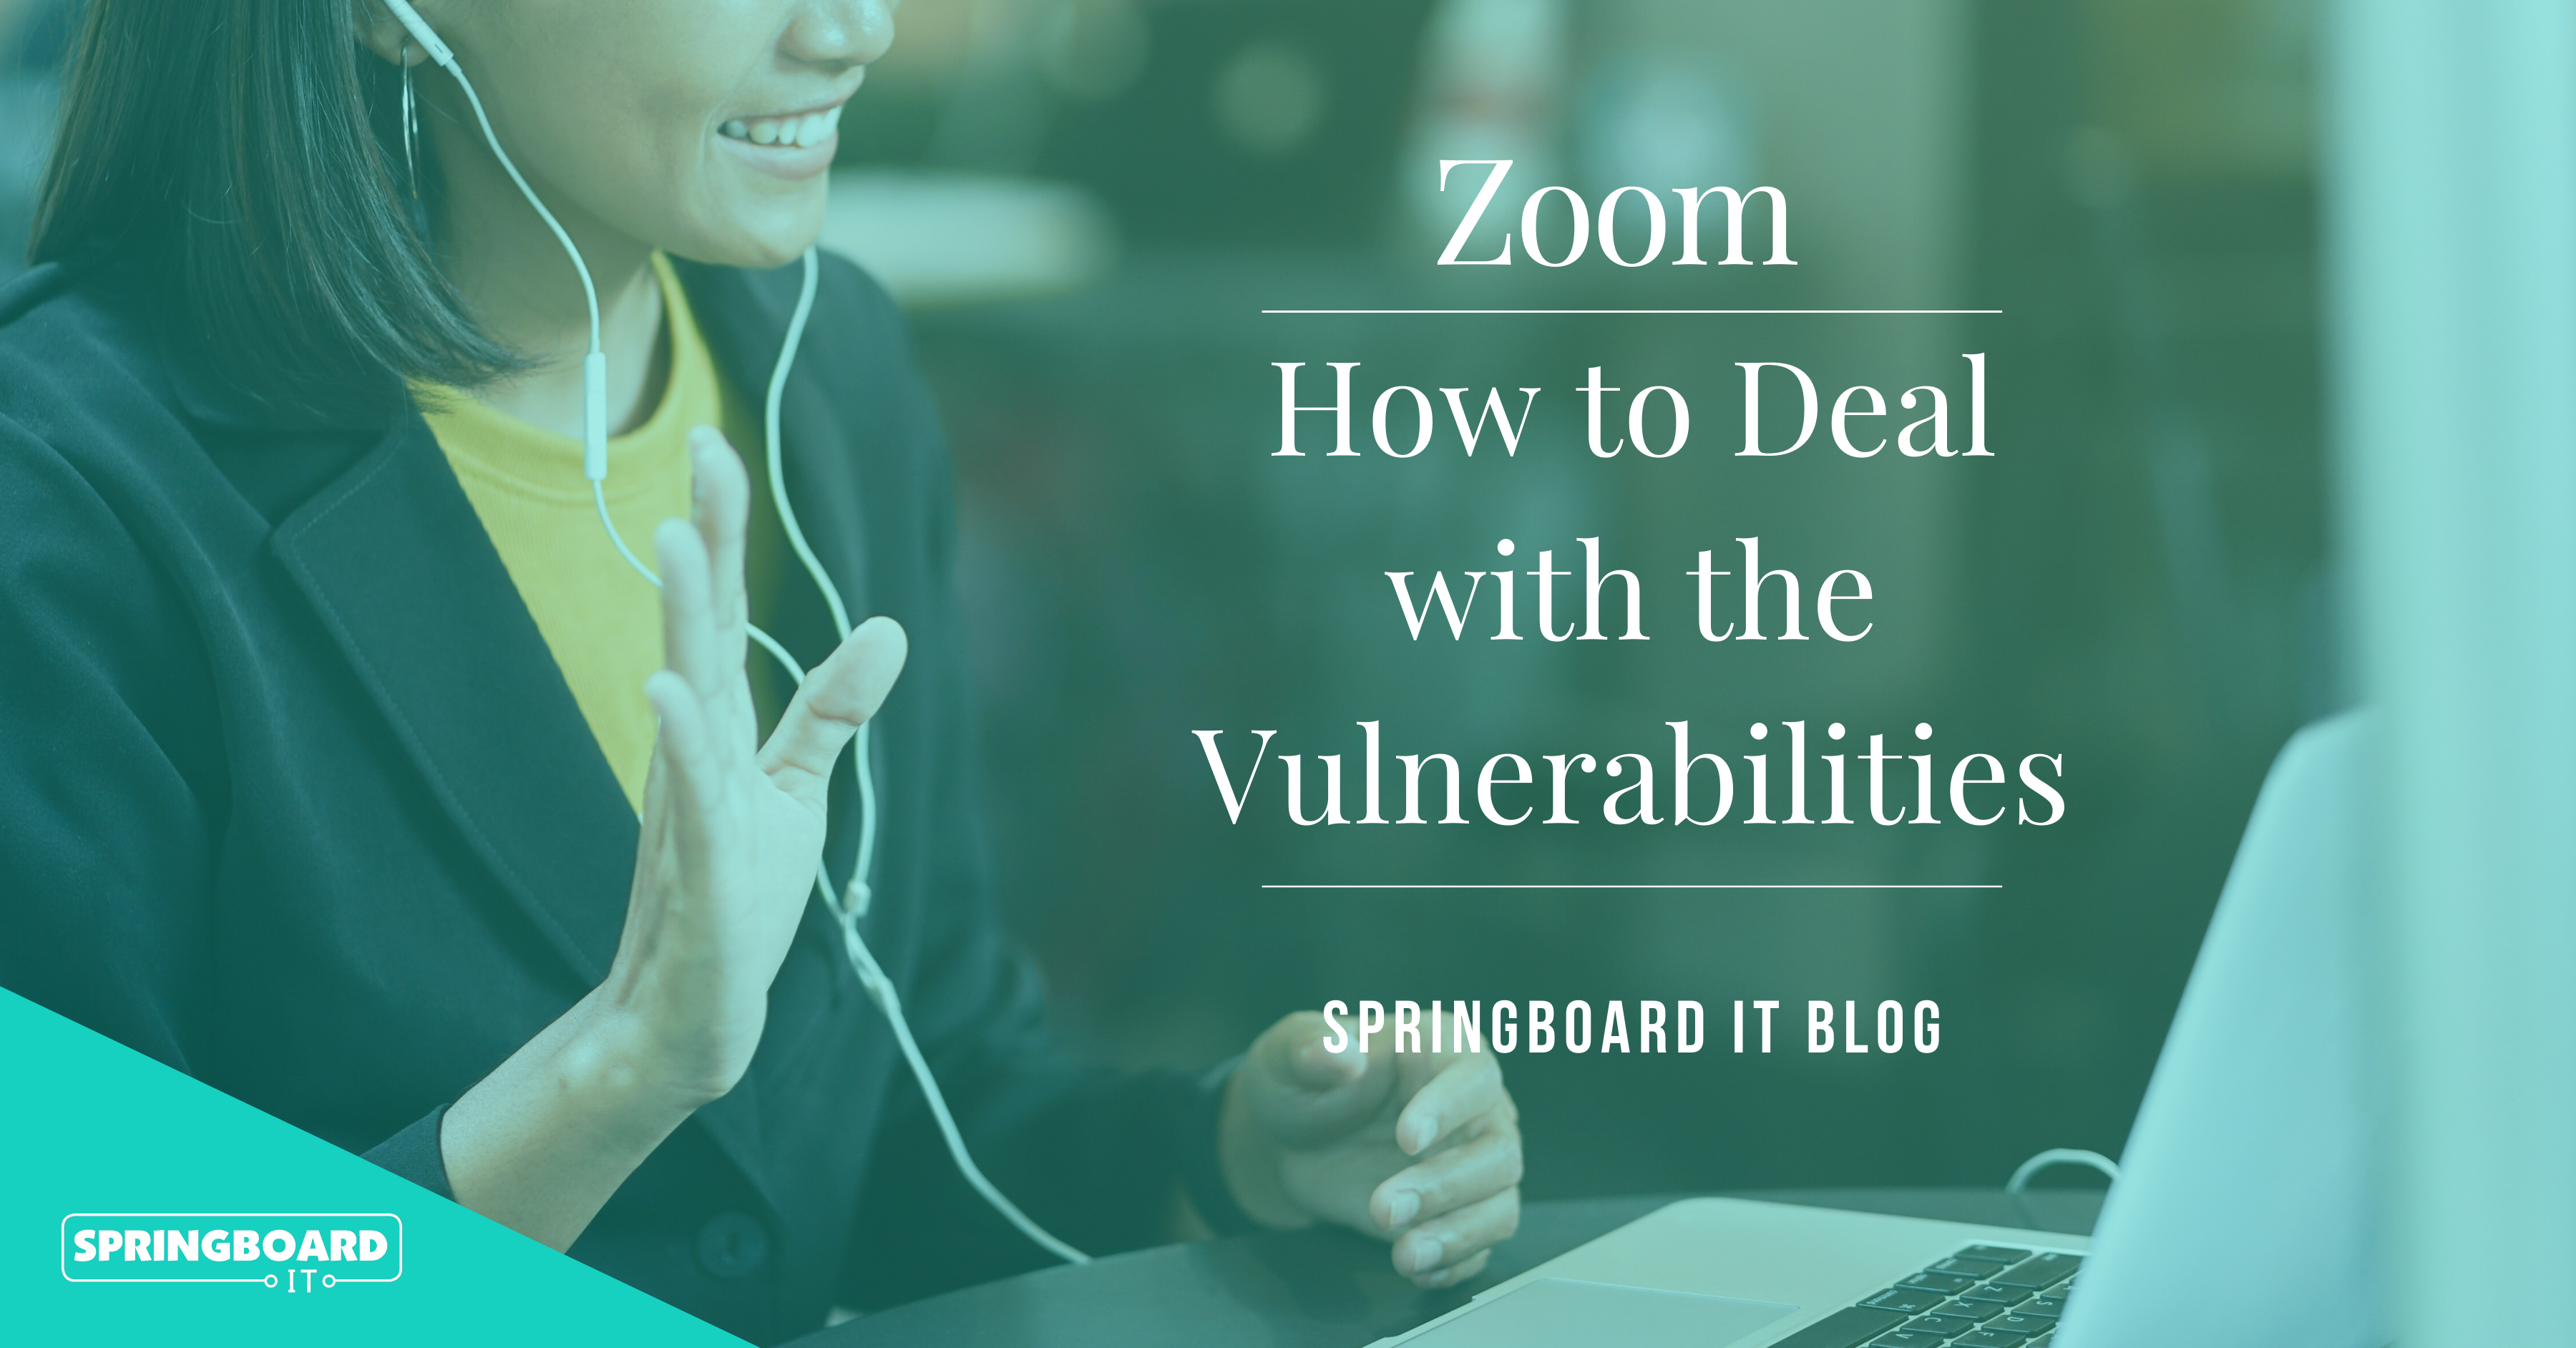 Zoom: How to Deal with the Vulnerabilities